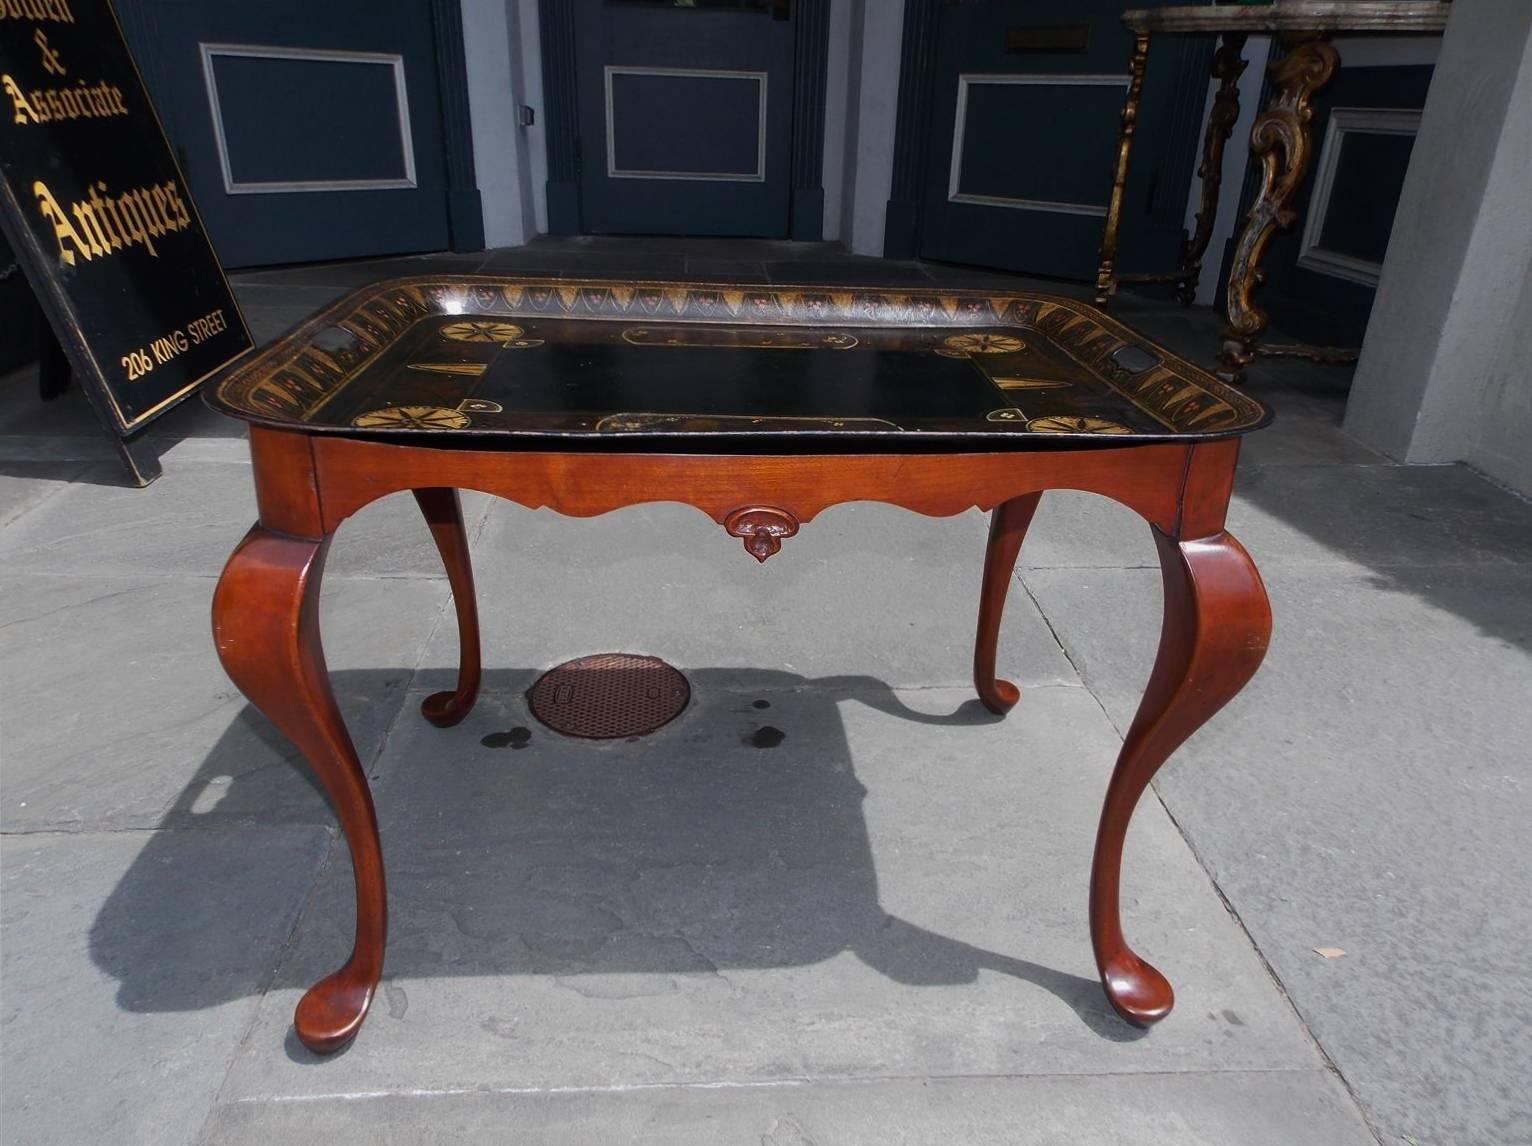 American hand-painted decorative tole tray on carved mahogany stand. Tray has two side handles with hand-painted floral, fruit and medallion motif. Stand was made for tray with a carved scalloped skirt, carved knee and terminating on stylized pad